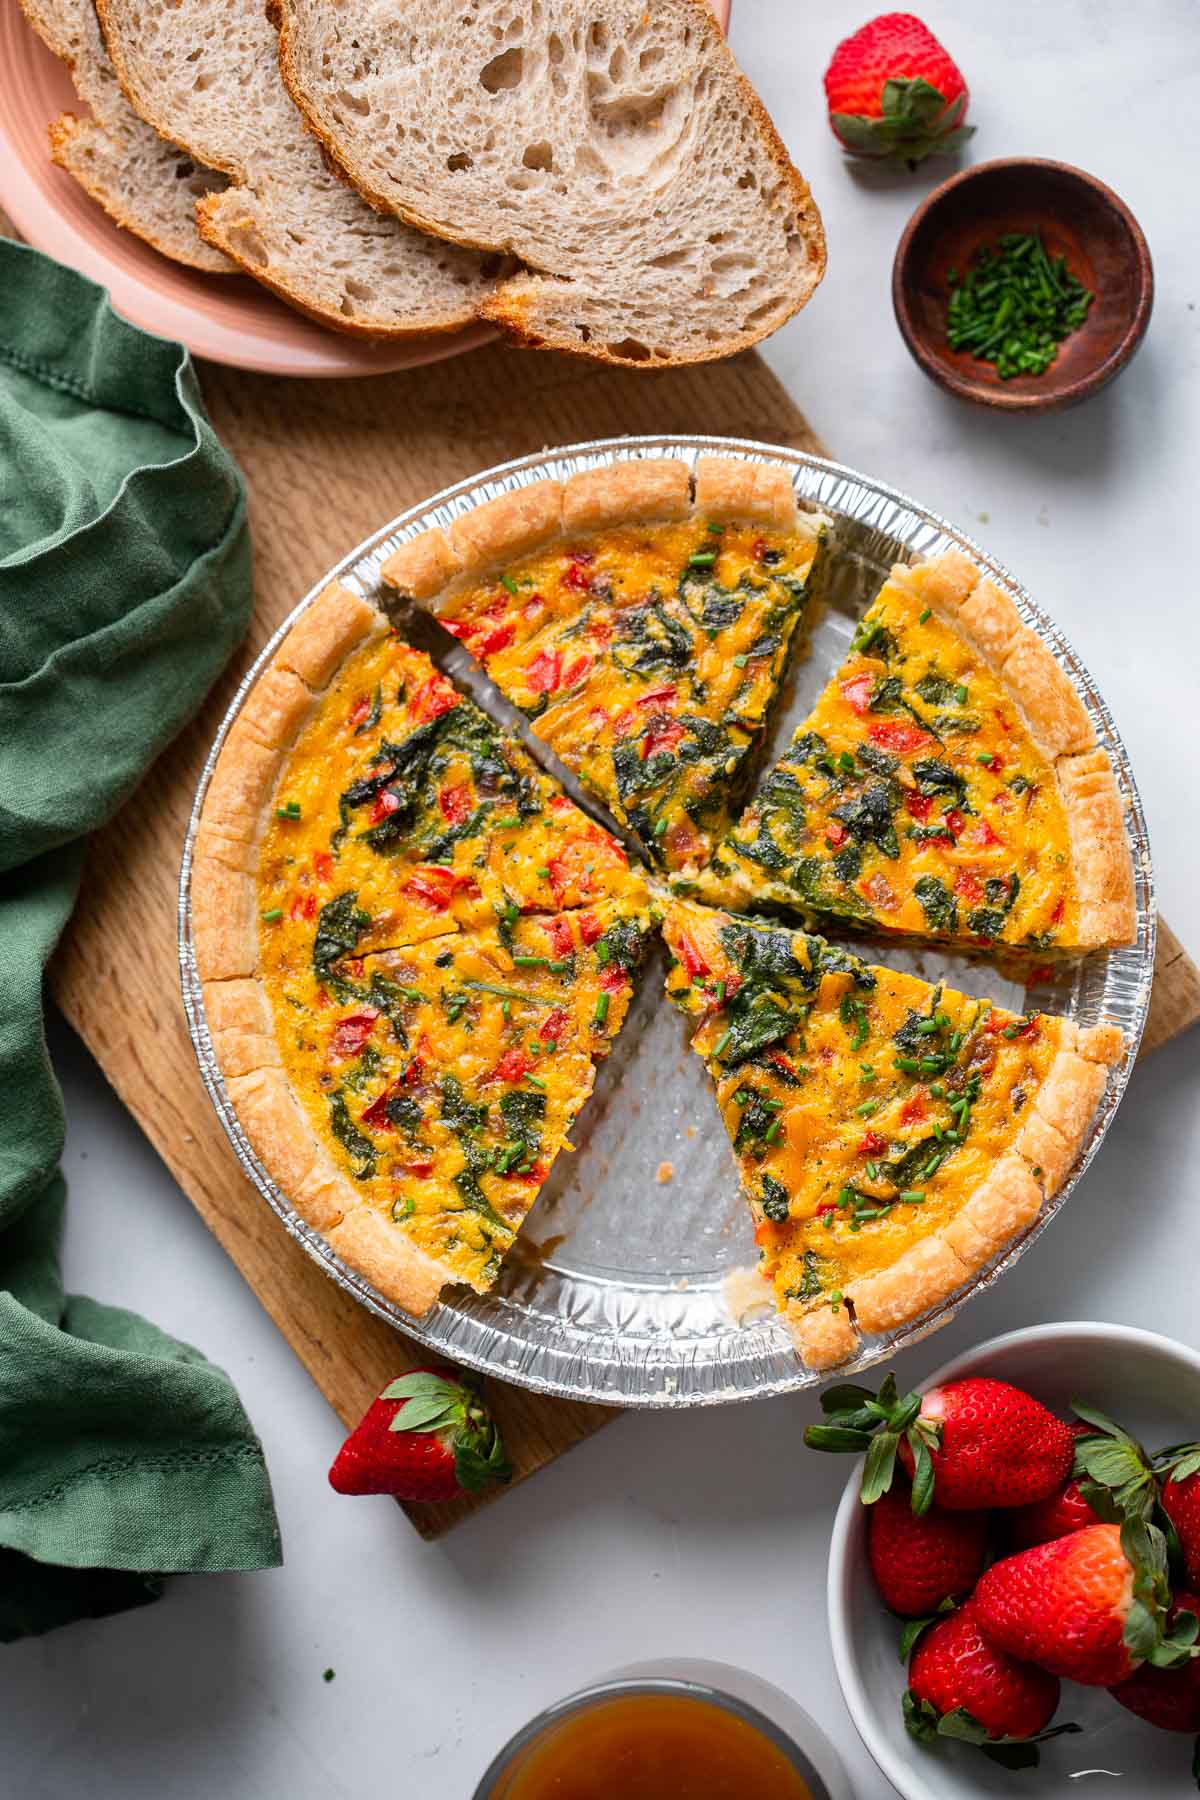 JUST vegan egg quiche in an aluminum tray without the slice.